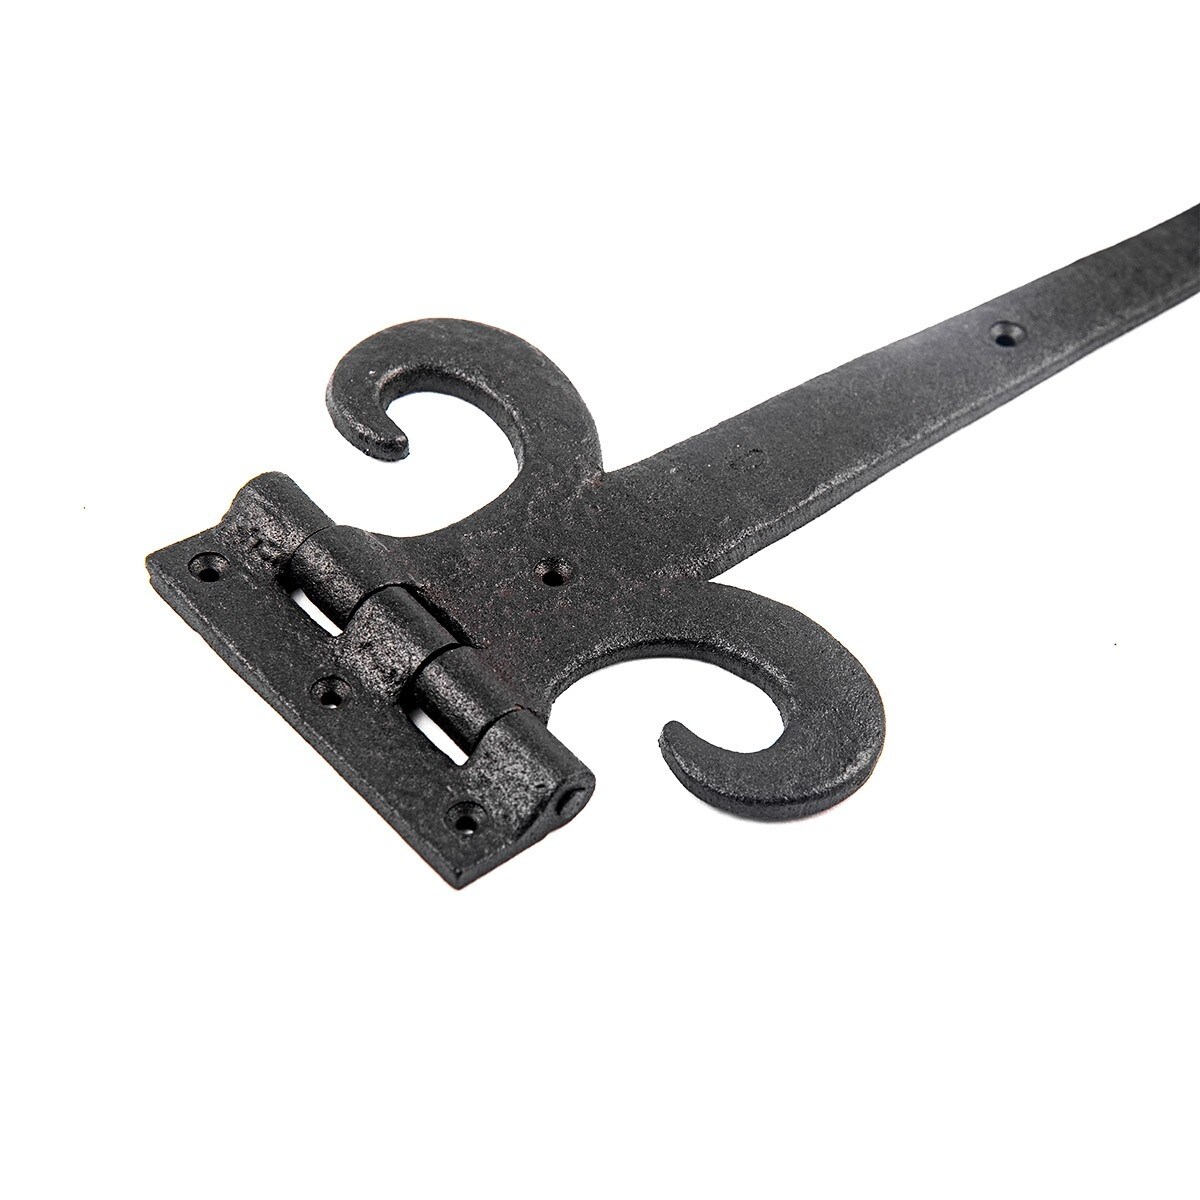 Renovators Supply Manufacturing Strap Hinge 15 in. Black Wrought Iron Spade  Tip Strap Gate and Door Hinges with Hardware, Pack of 2